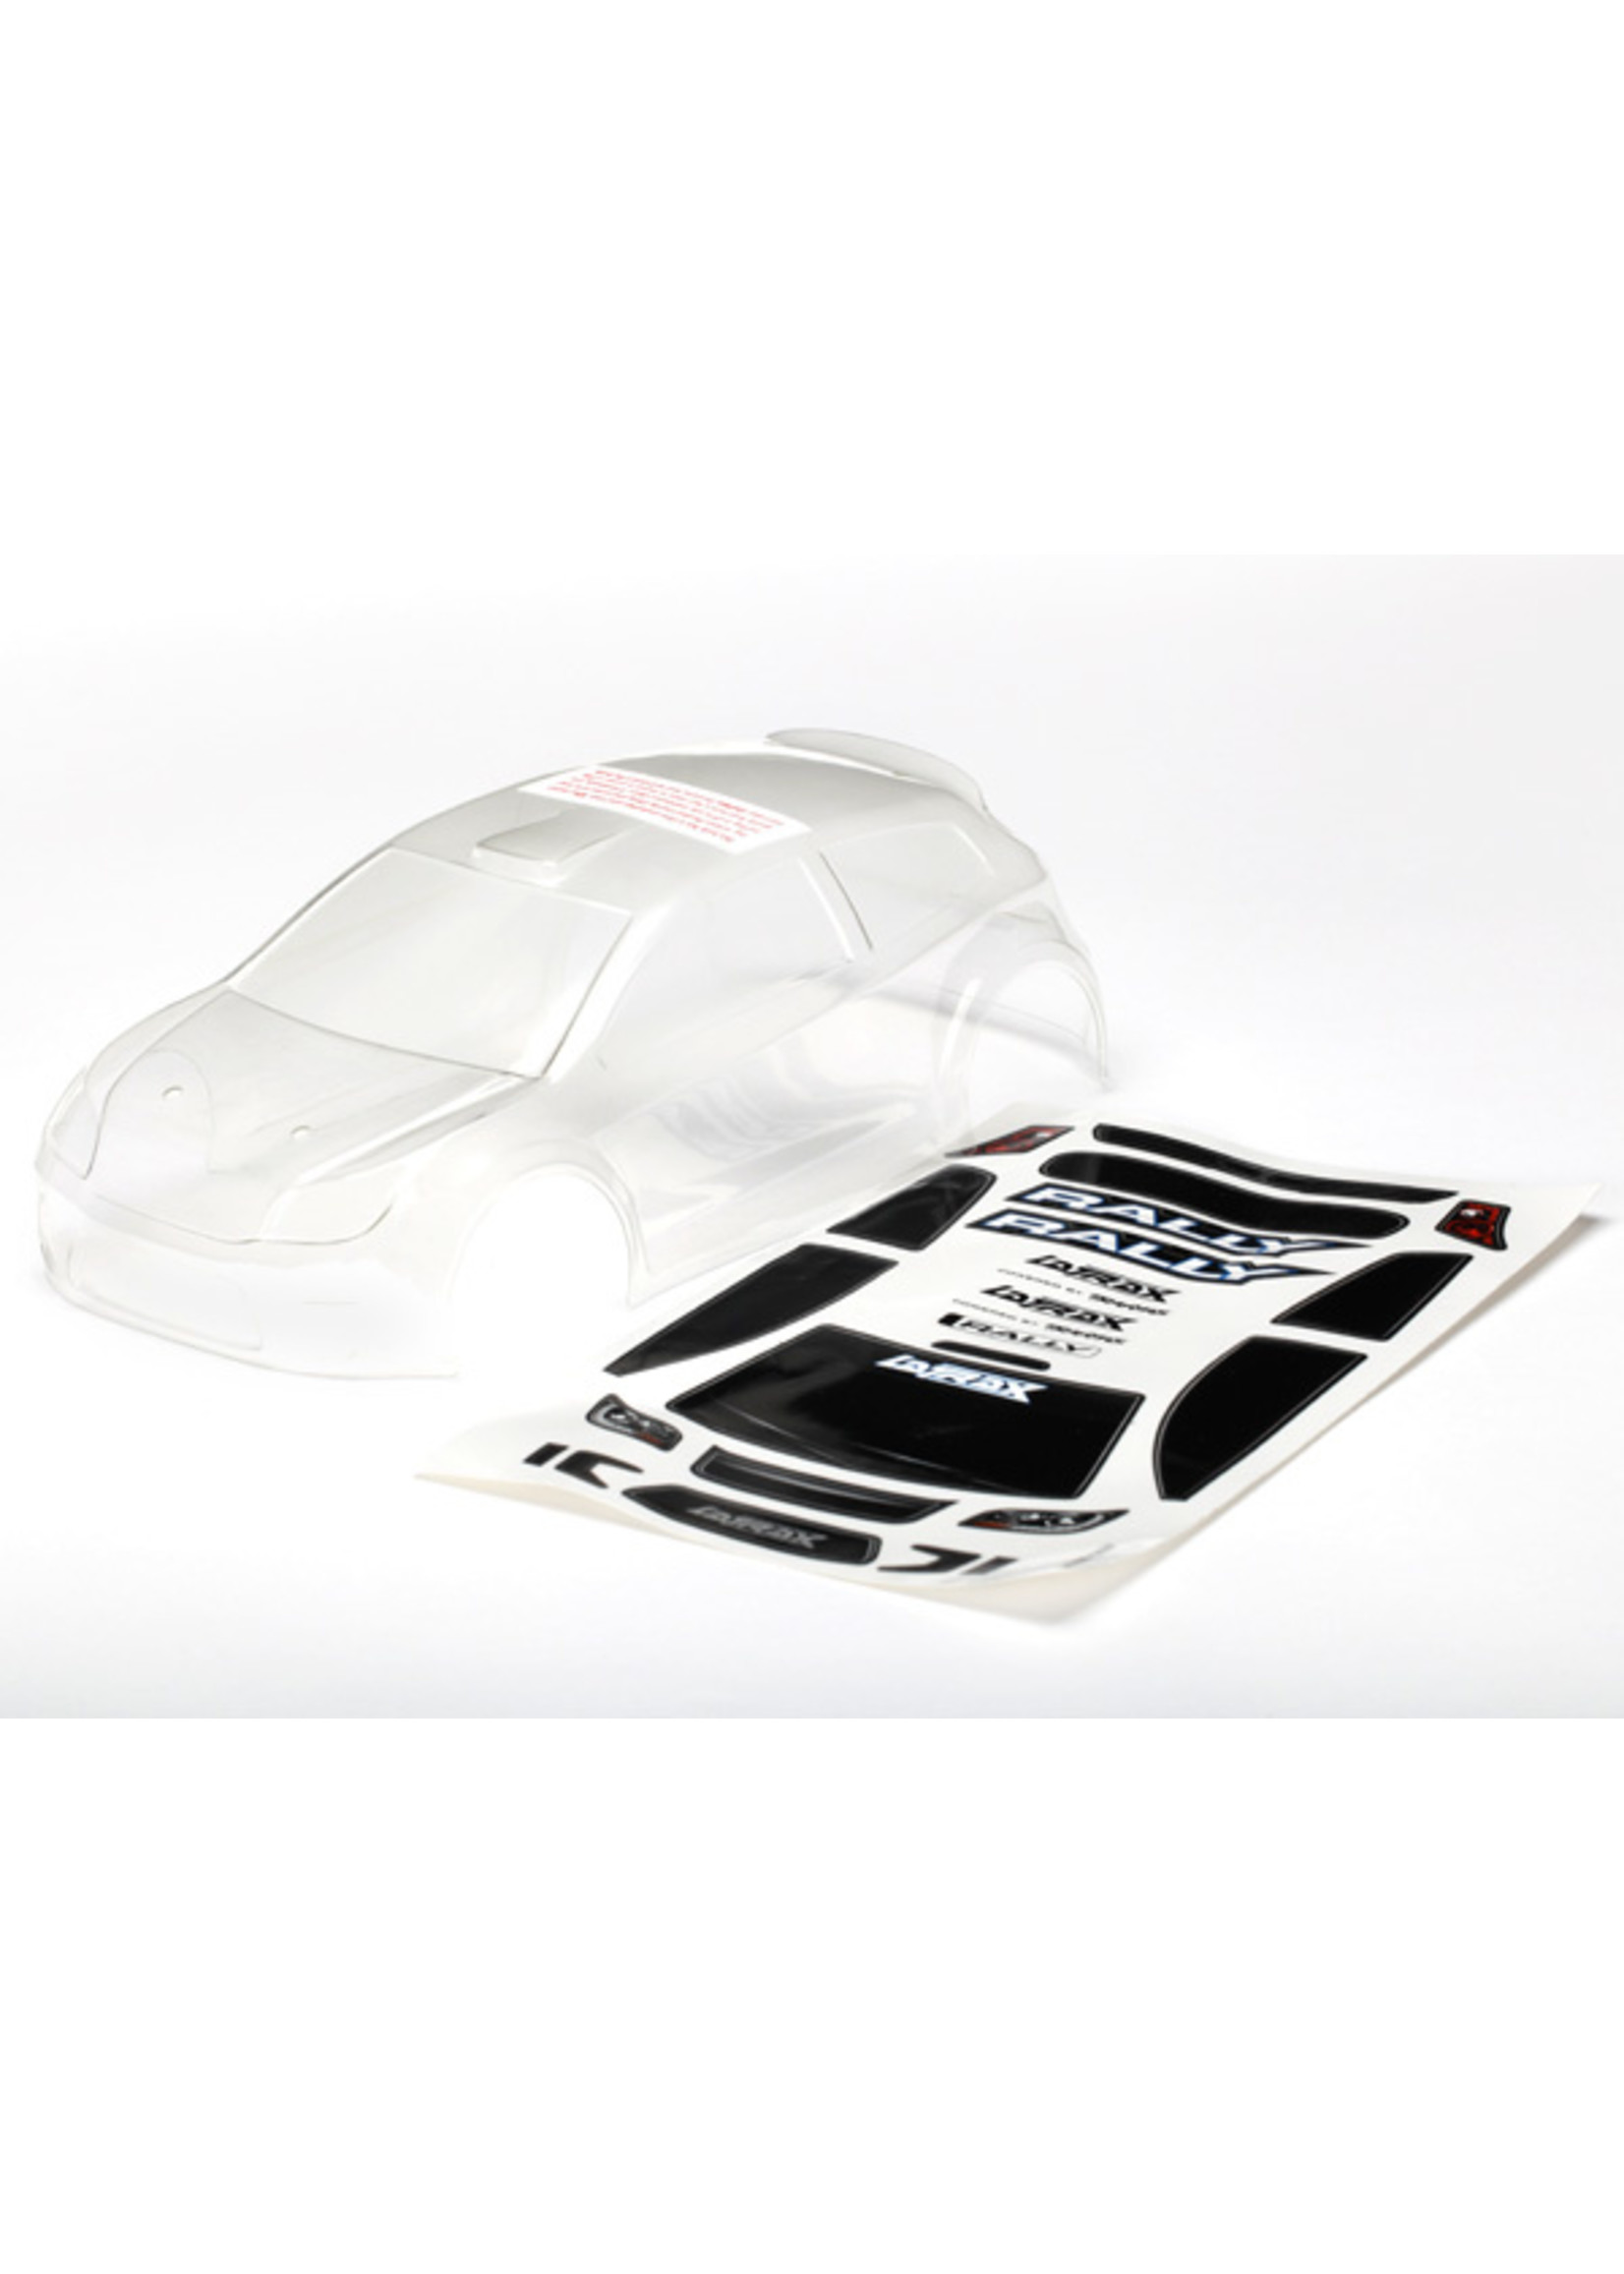 Traxxas 7511 - LaTrax 1/18 Rally Body with Decals - Clear